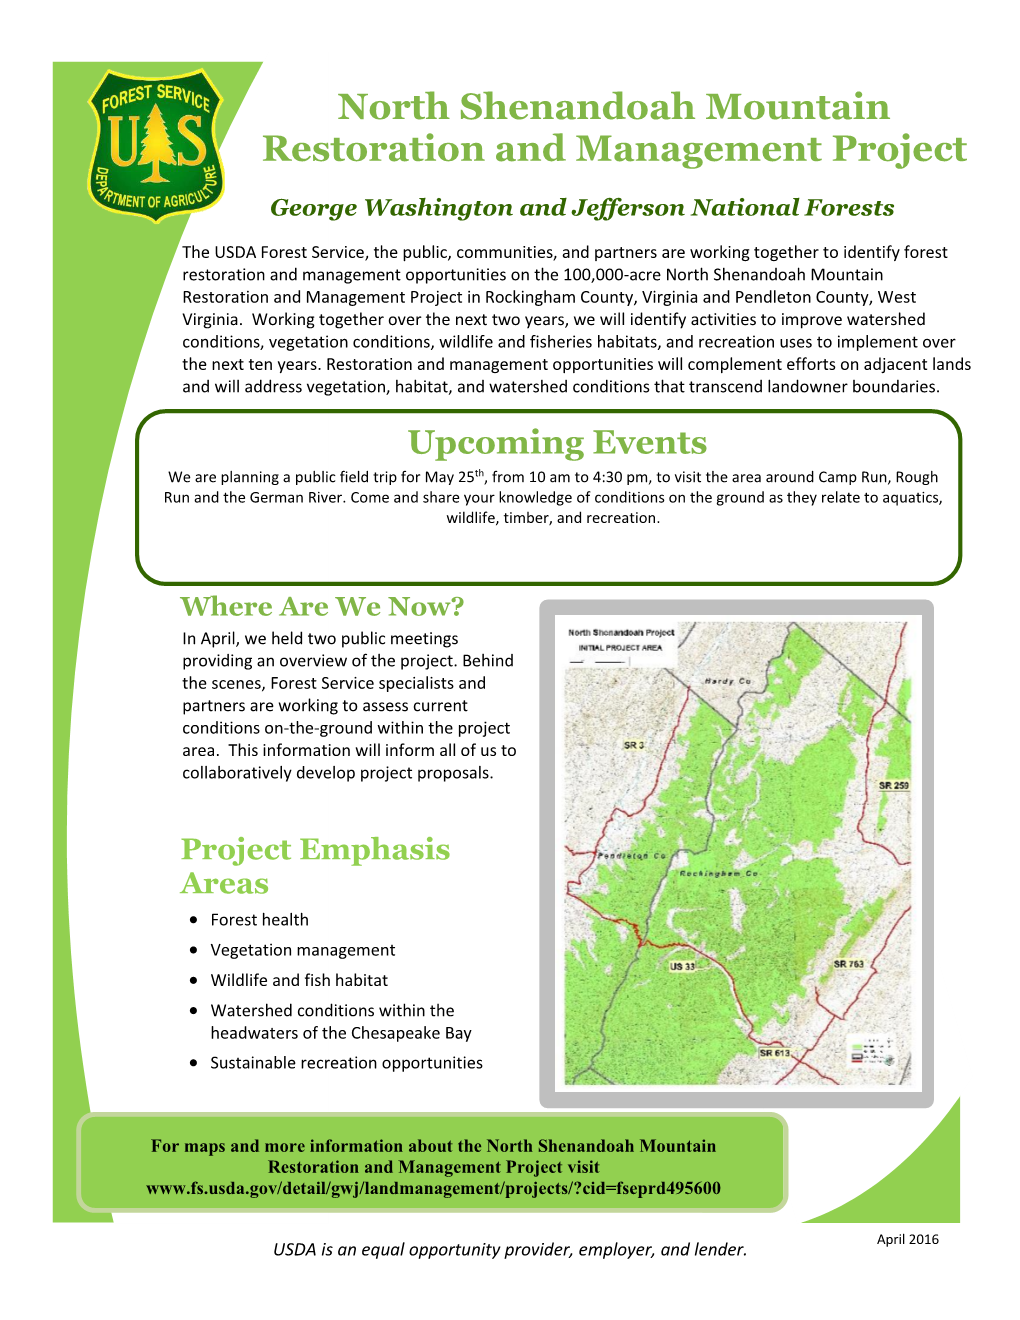 North Shenandoah Mountain Restoration and Management Project